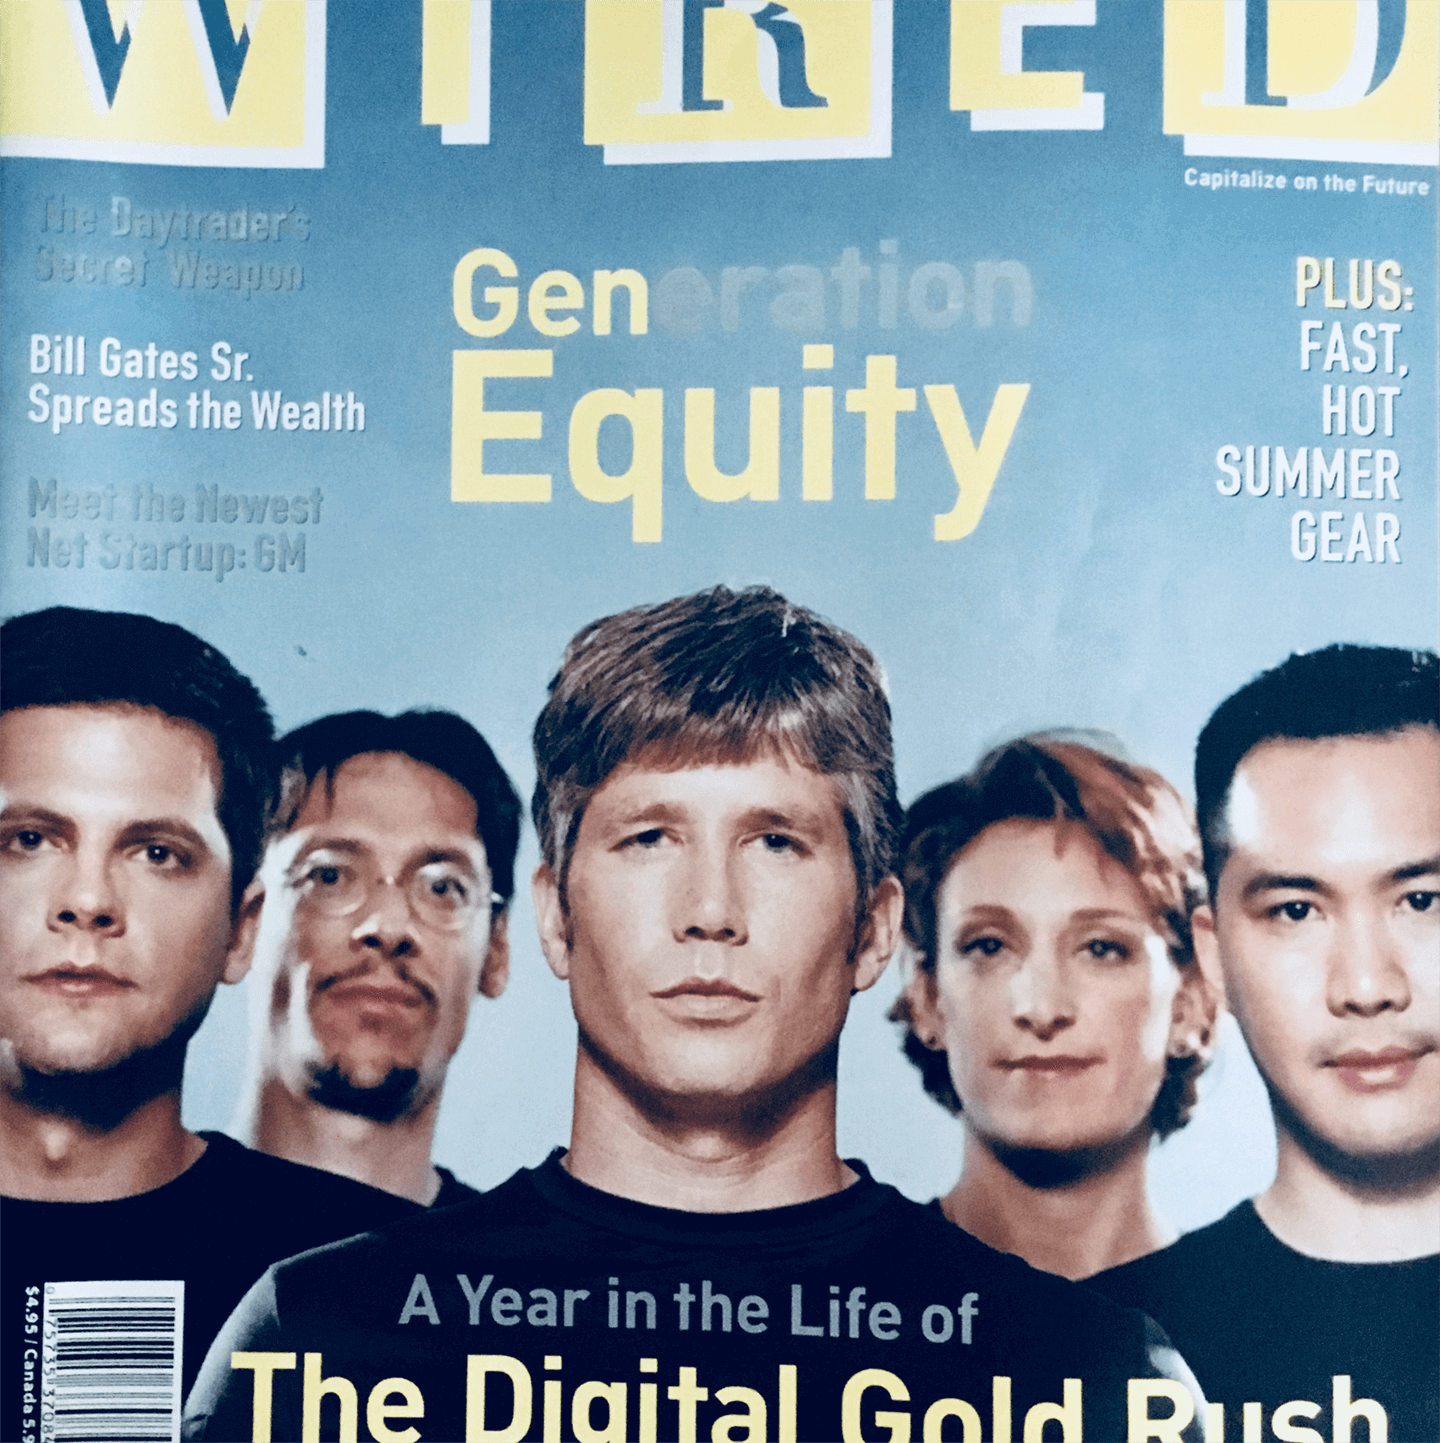 Po Bronson on the cover of Wired magazine